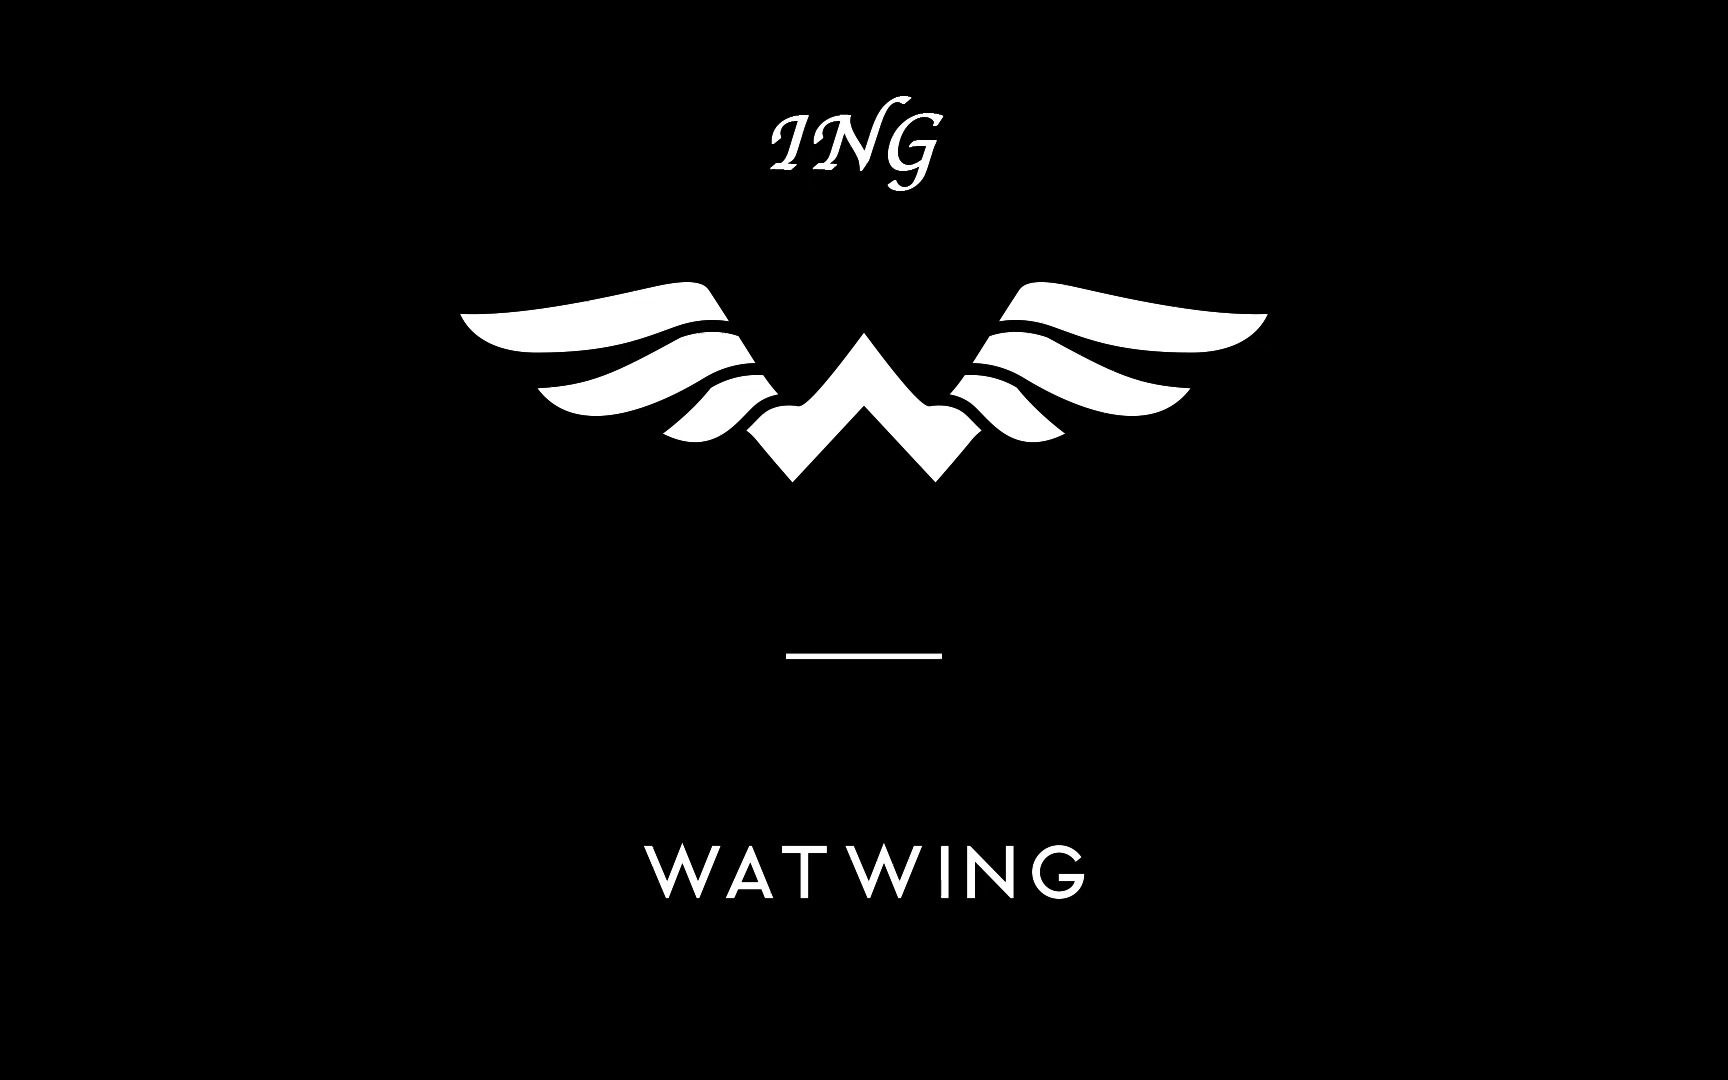 WATWING 'ING' Official Dance Practice 练习室版